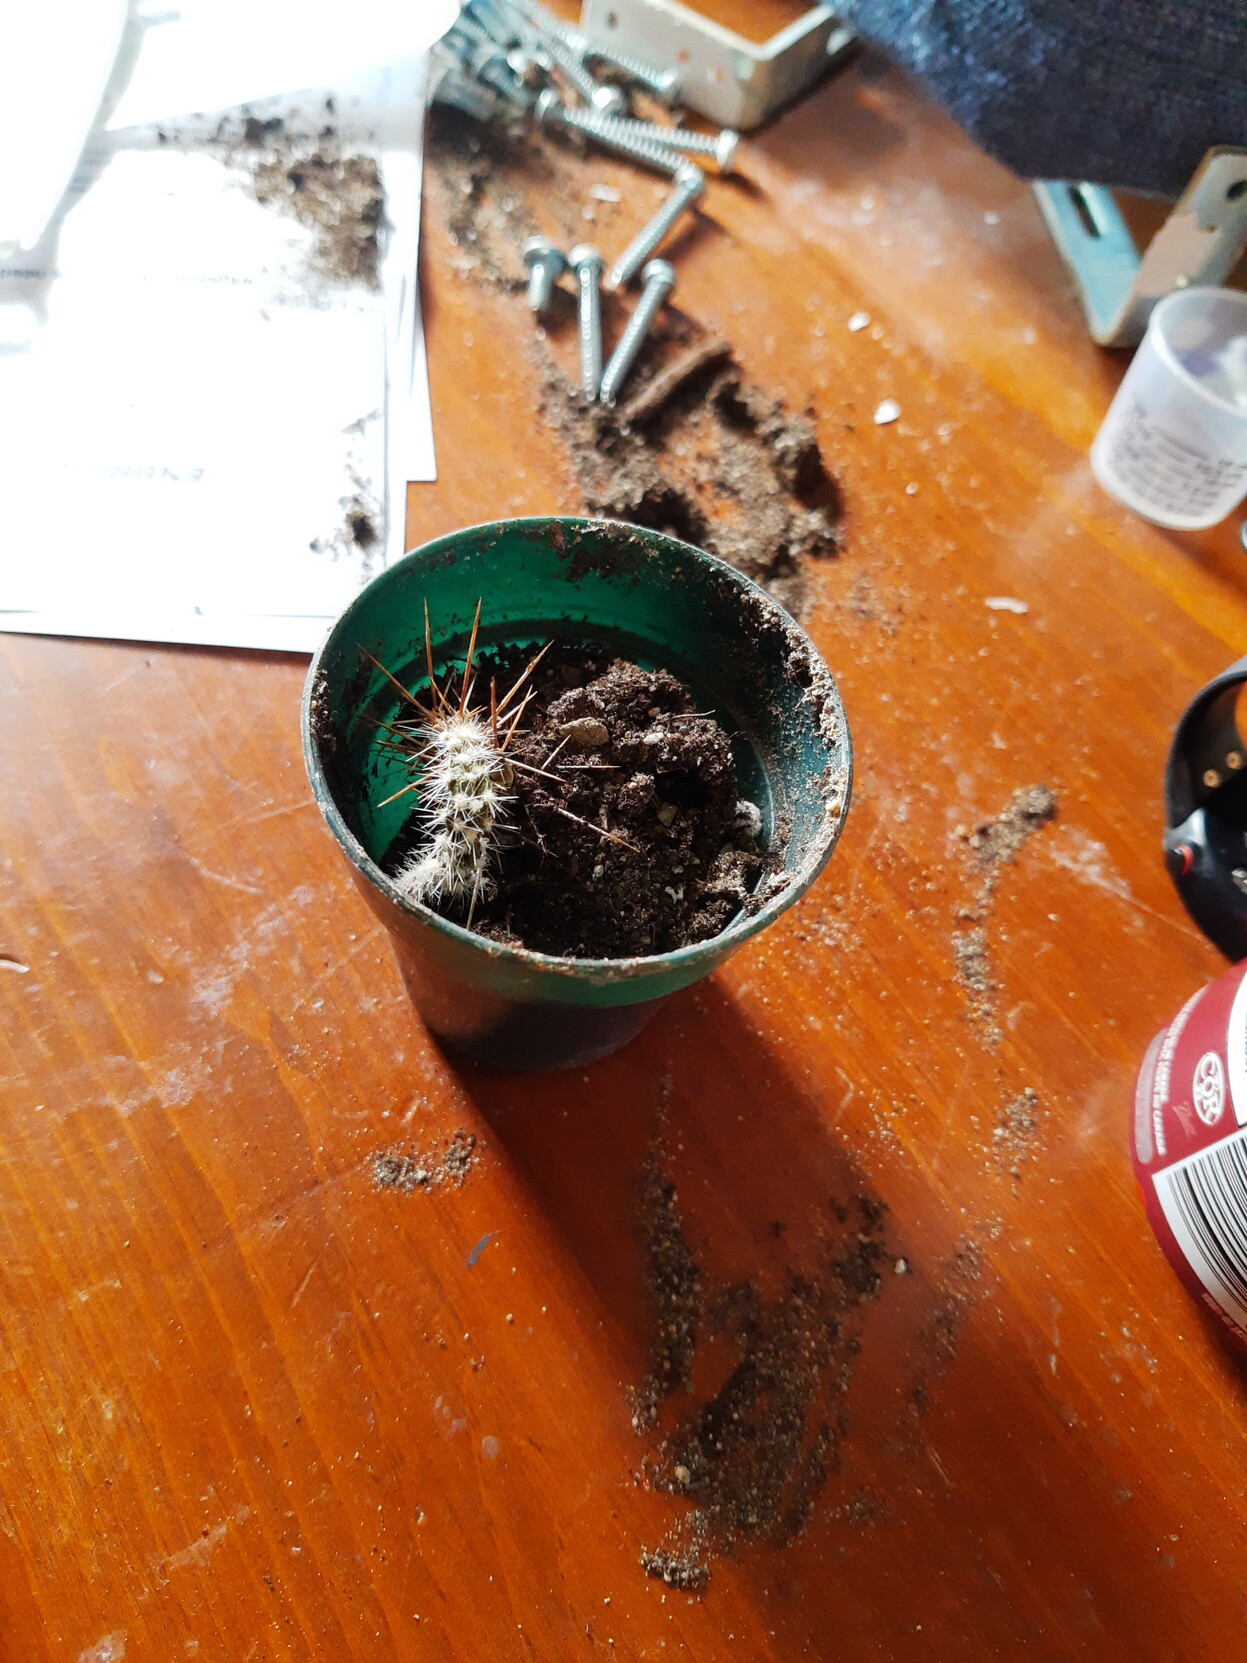 Tiny spikey cactus  on a messy bedside table surrounded by dirt because I knocked it over and haven't cleaned up yet...